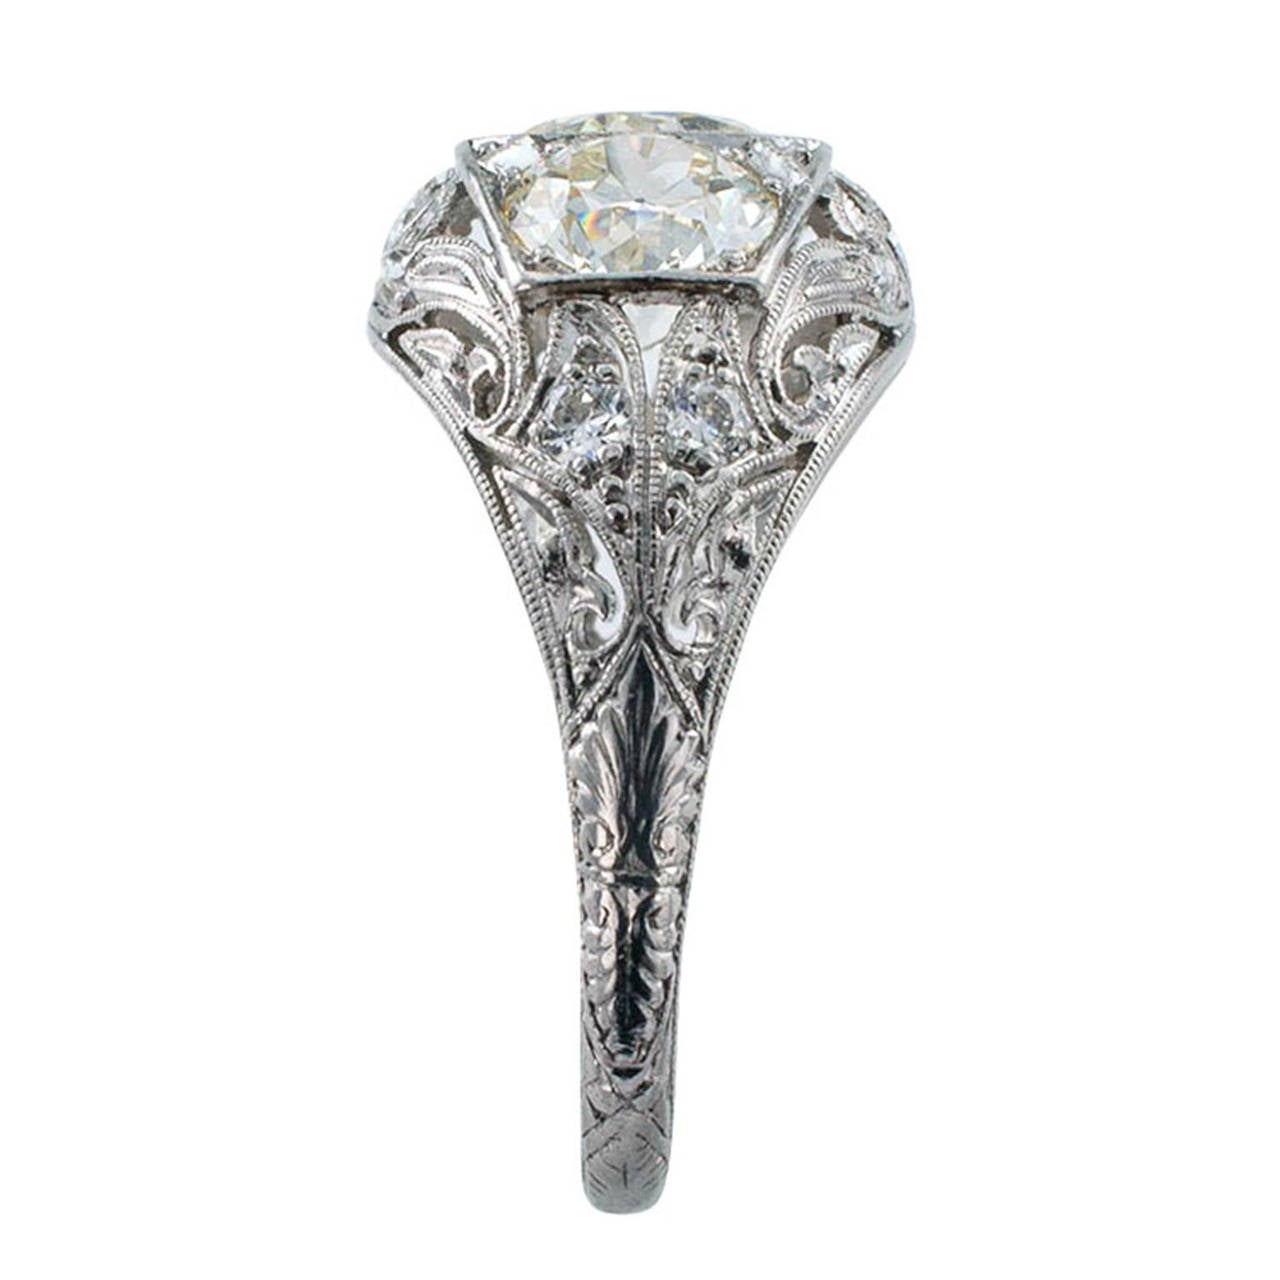 3.00 Carats TW Edwardian Three Stone Diamond Ring

Antique diamond rings that pack as much beauty and exquisite detail as this one does are becoming more rare with each passing day.  The central old European-cut diamond weighing approximately 1.20